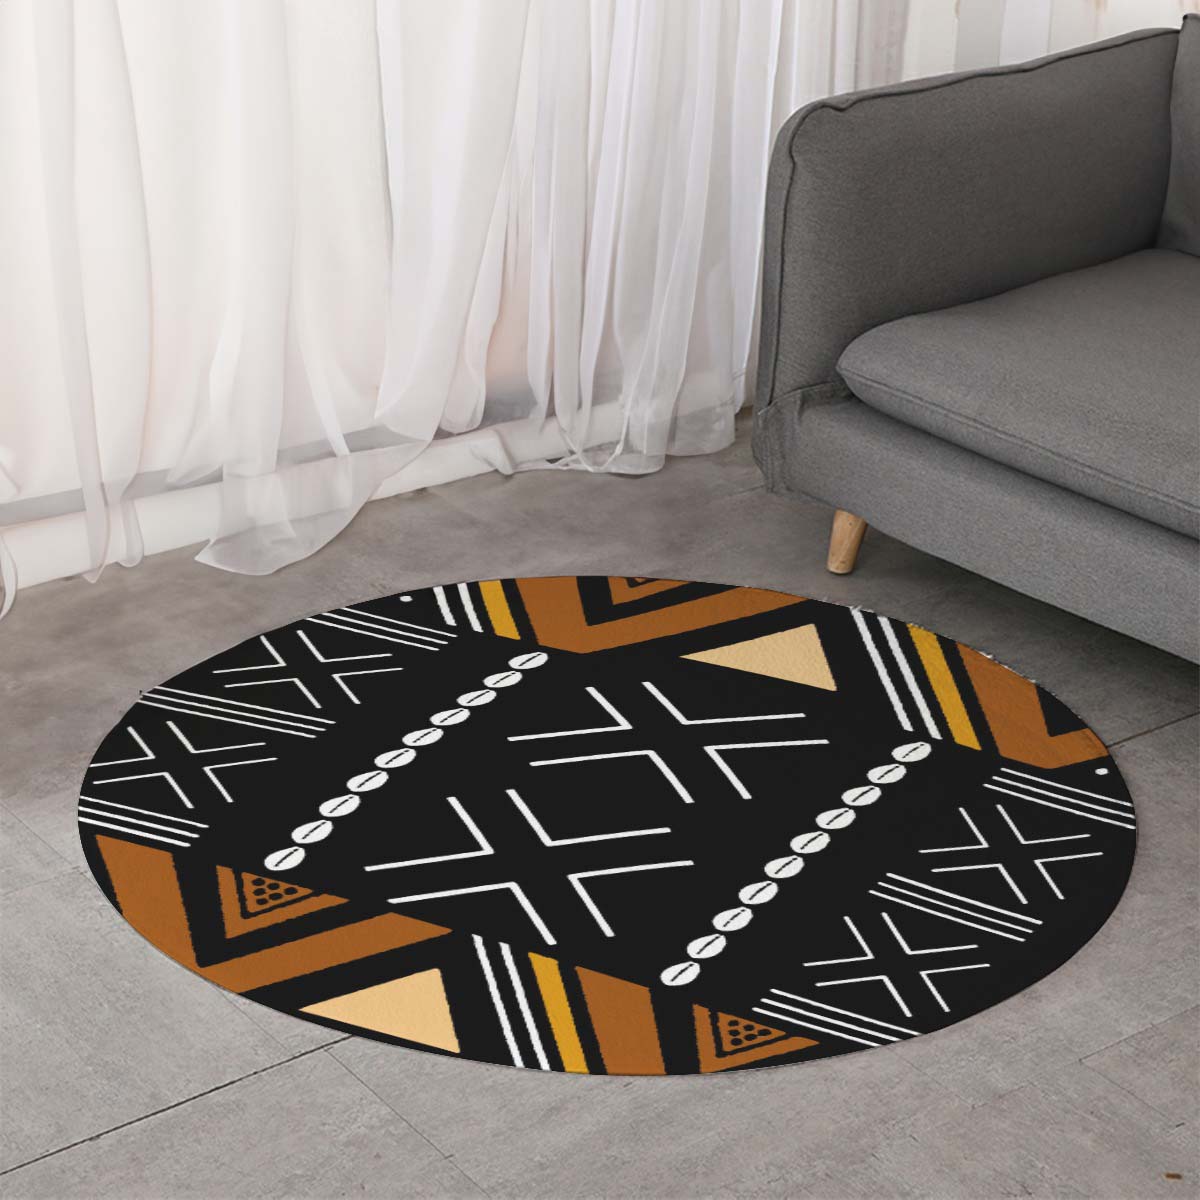 Round African Rug For Sale Tribal Print Carpet - Bynelo